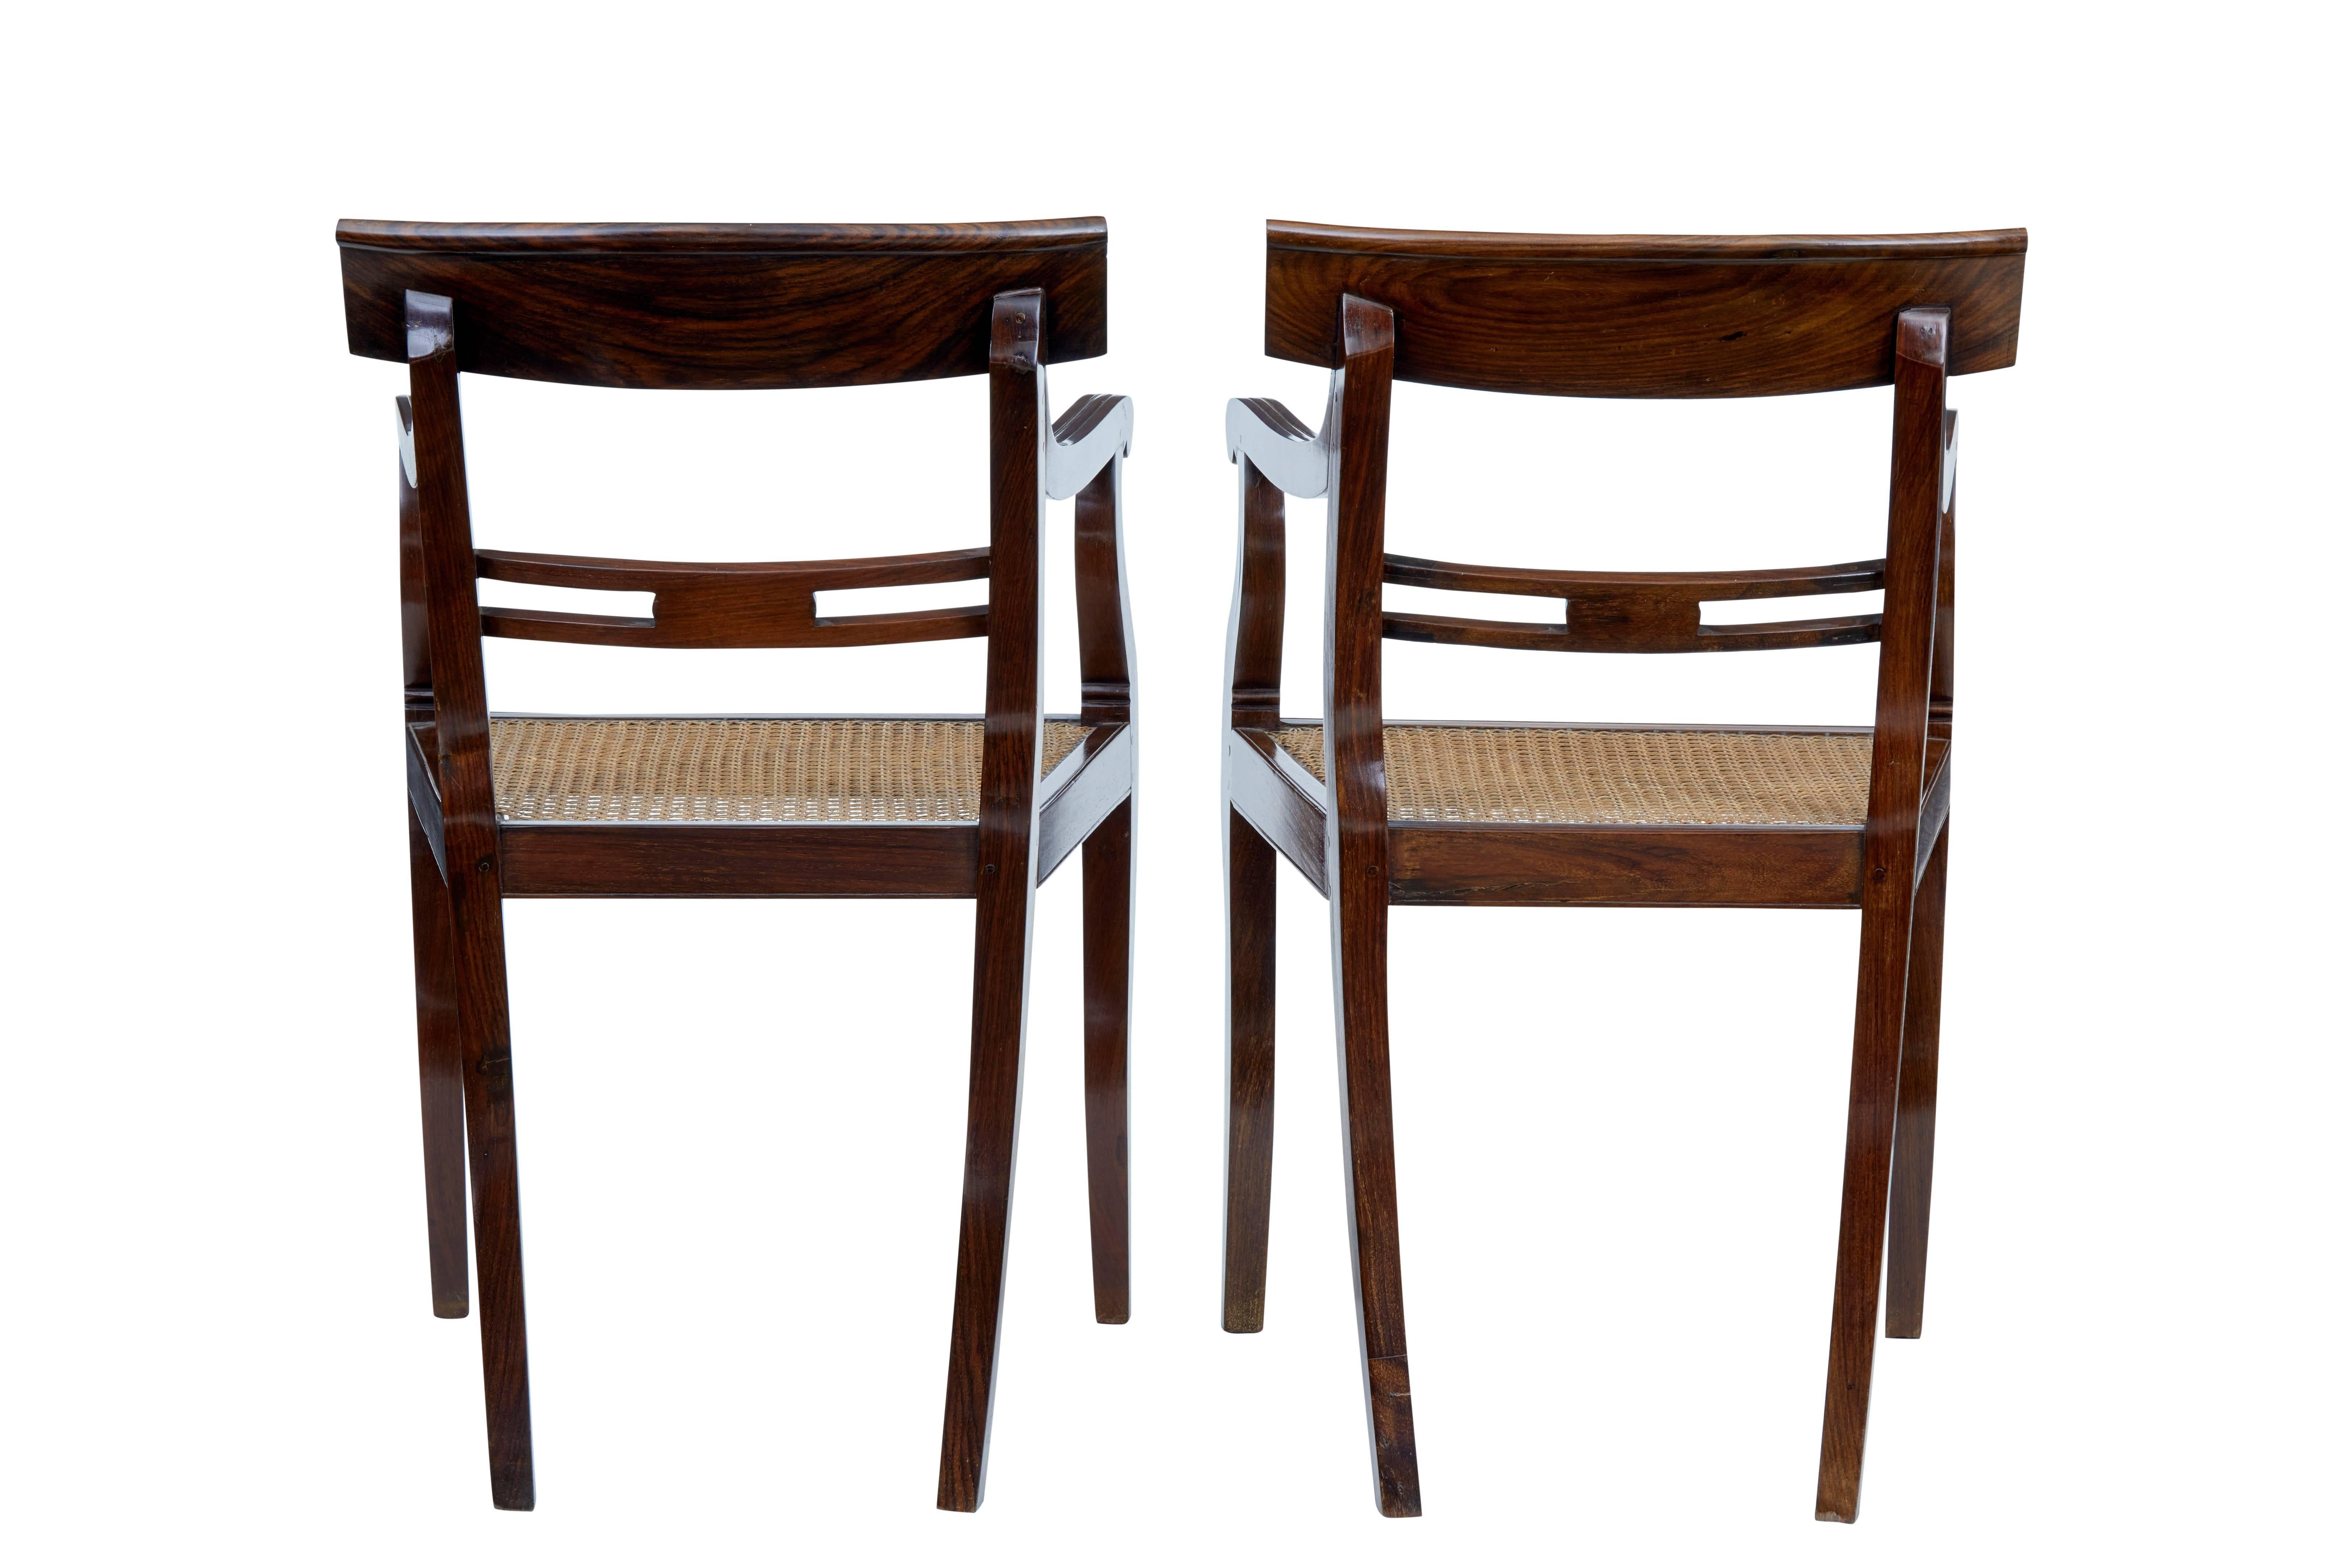 Caning Near Pair of Chinese Export Huanghuali Cane Armchairs